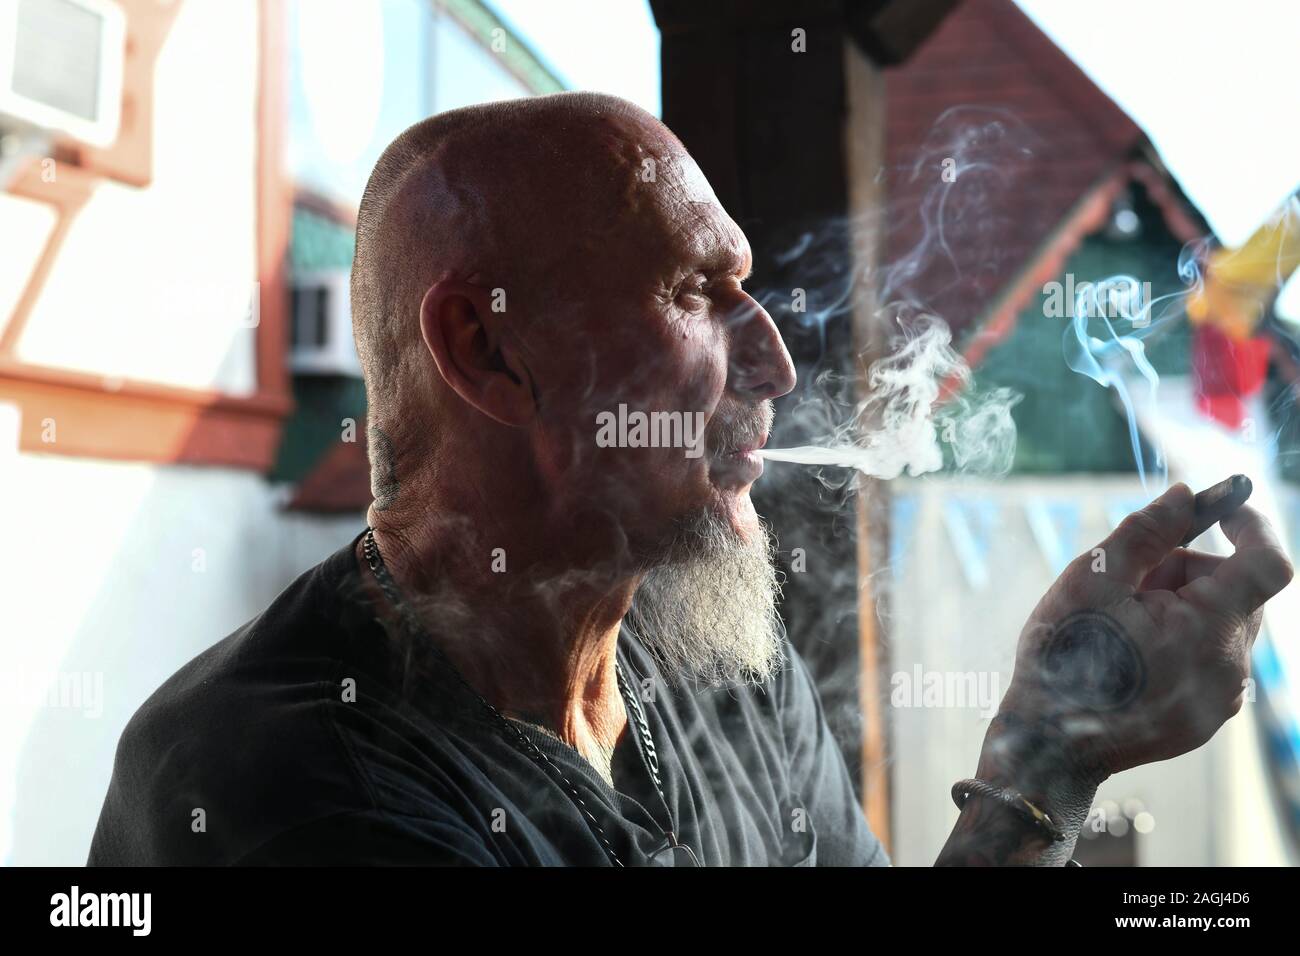 Helena, Georgia, USA. 15th Sep, 2019. CHESTER DOLES, a self-declared white nationalist who said he shares 95 percent of Trump's agenda, smokes a cigarette in Helena, a Bavarian tourist town popular with exiled-Nazis in the 1950s and more recently, Doles and his colleagues. Credit: Miguel Juarez Lugo/ZUMA Wire/Alamy Live News Stock Photo